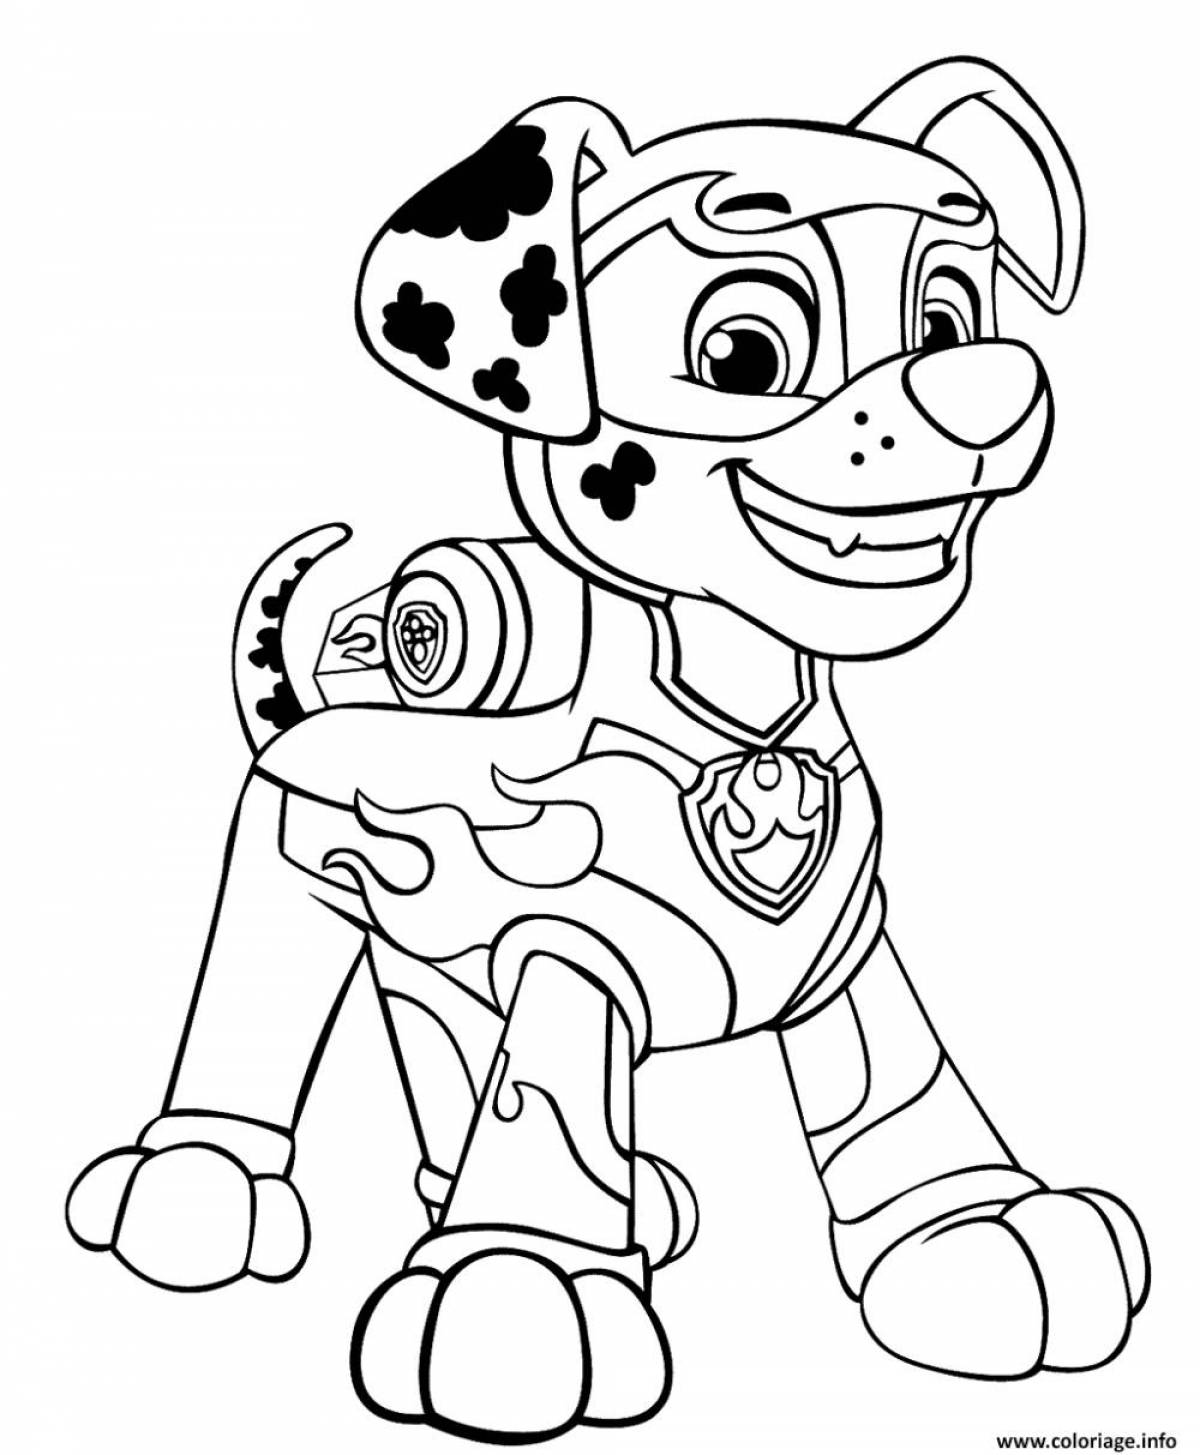 Paw patrol for children 6 7 years old #6